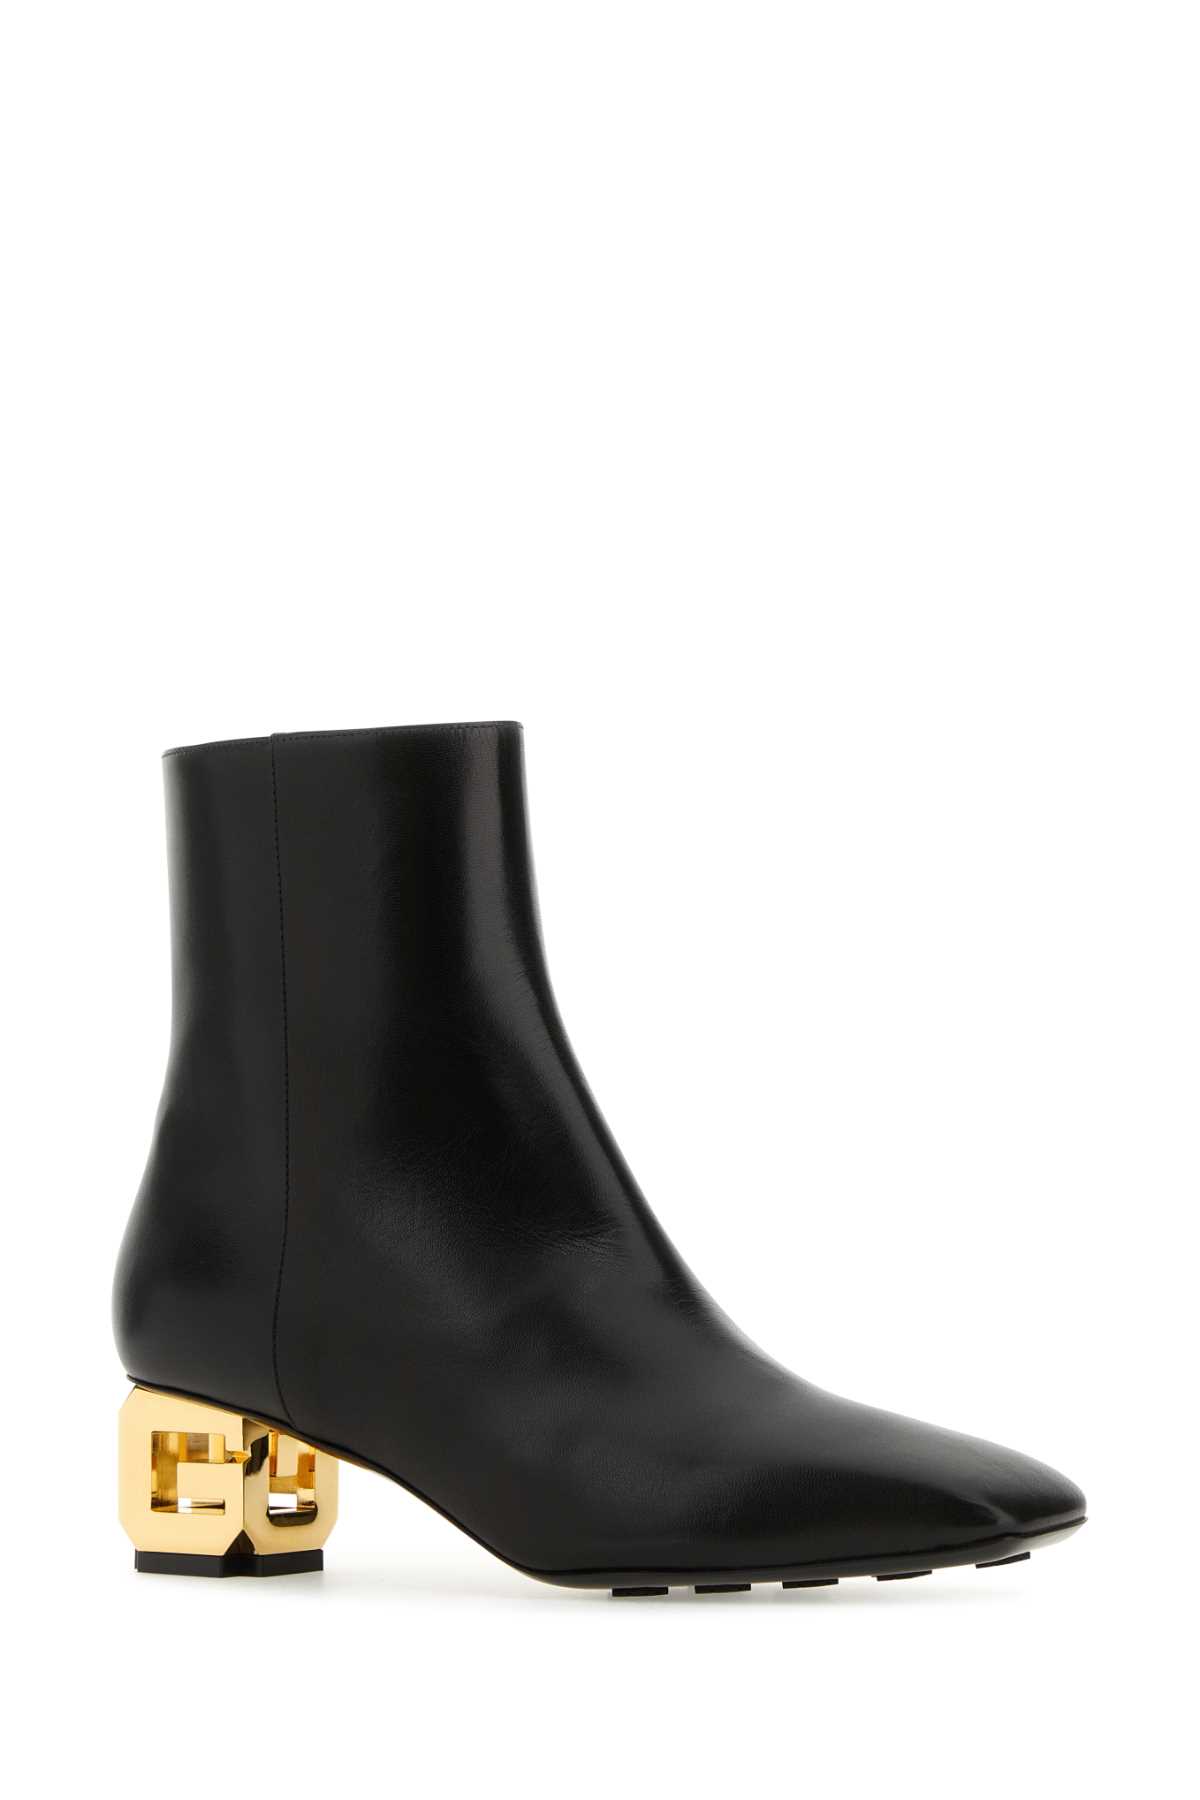 Givenchy Black Leather G Cube Ankle Boots